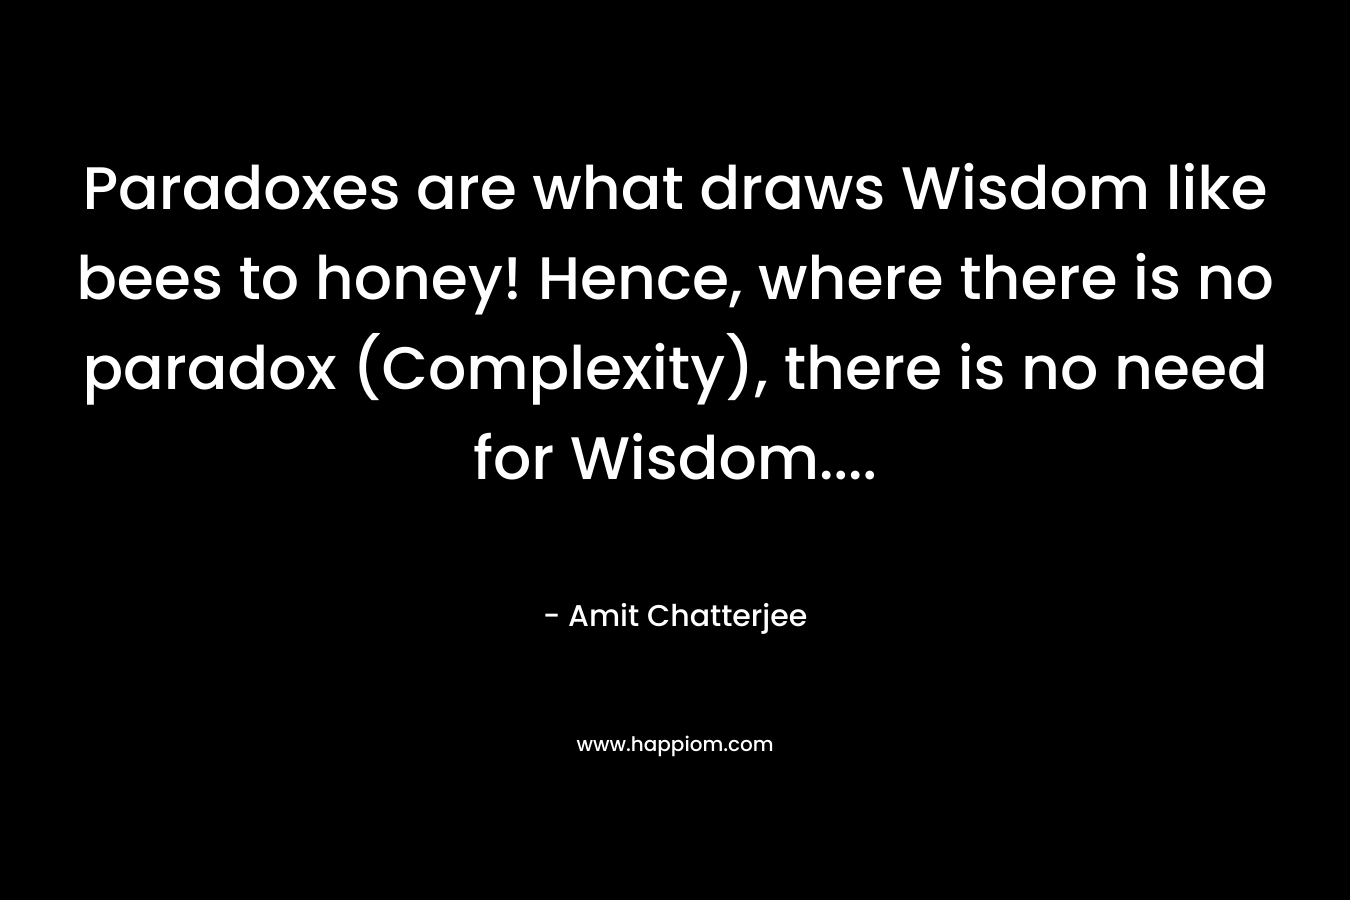 Paradoxes are what draws Wisdom like bees to honey! Hence, where there is no paradox (Complexity), there is no need for Wisdom....